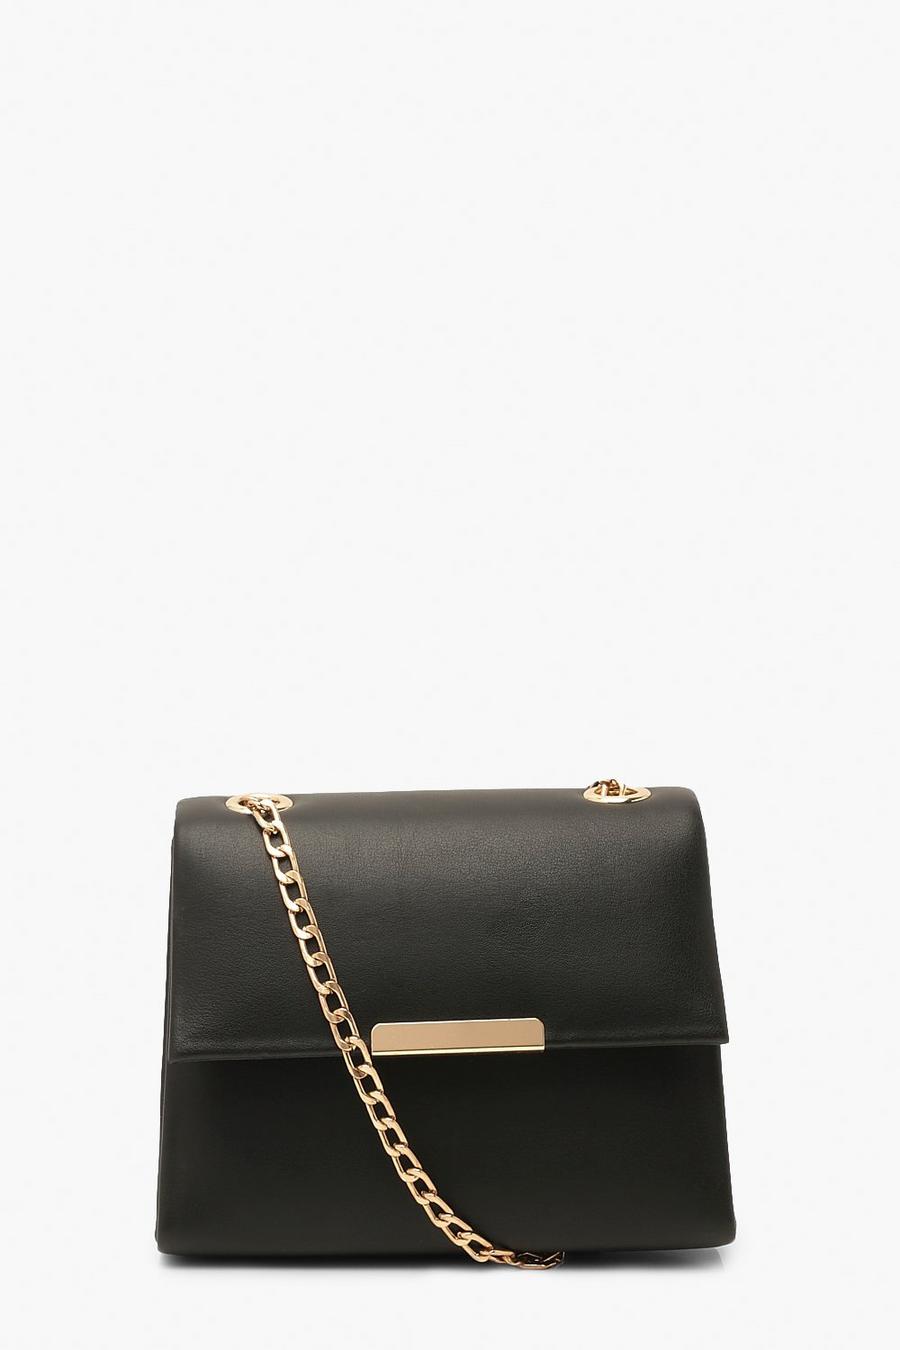 Black Smooth PU Structured Cross Body Bag & Chain image number 1